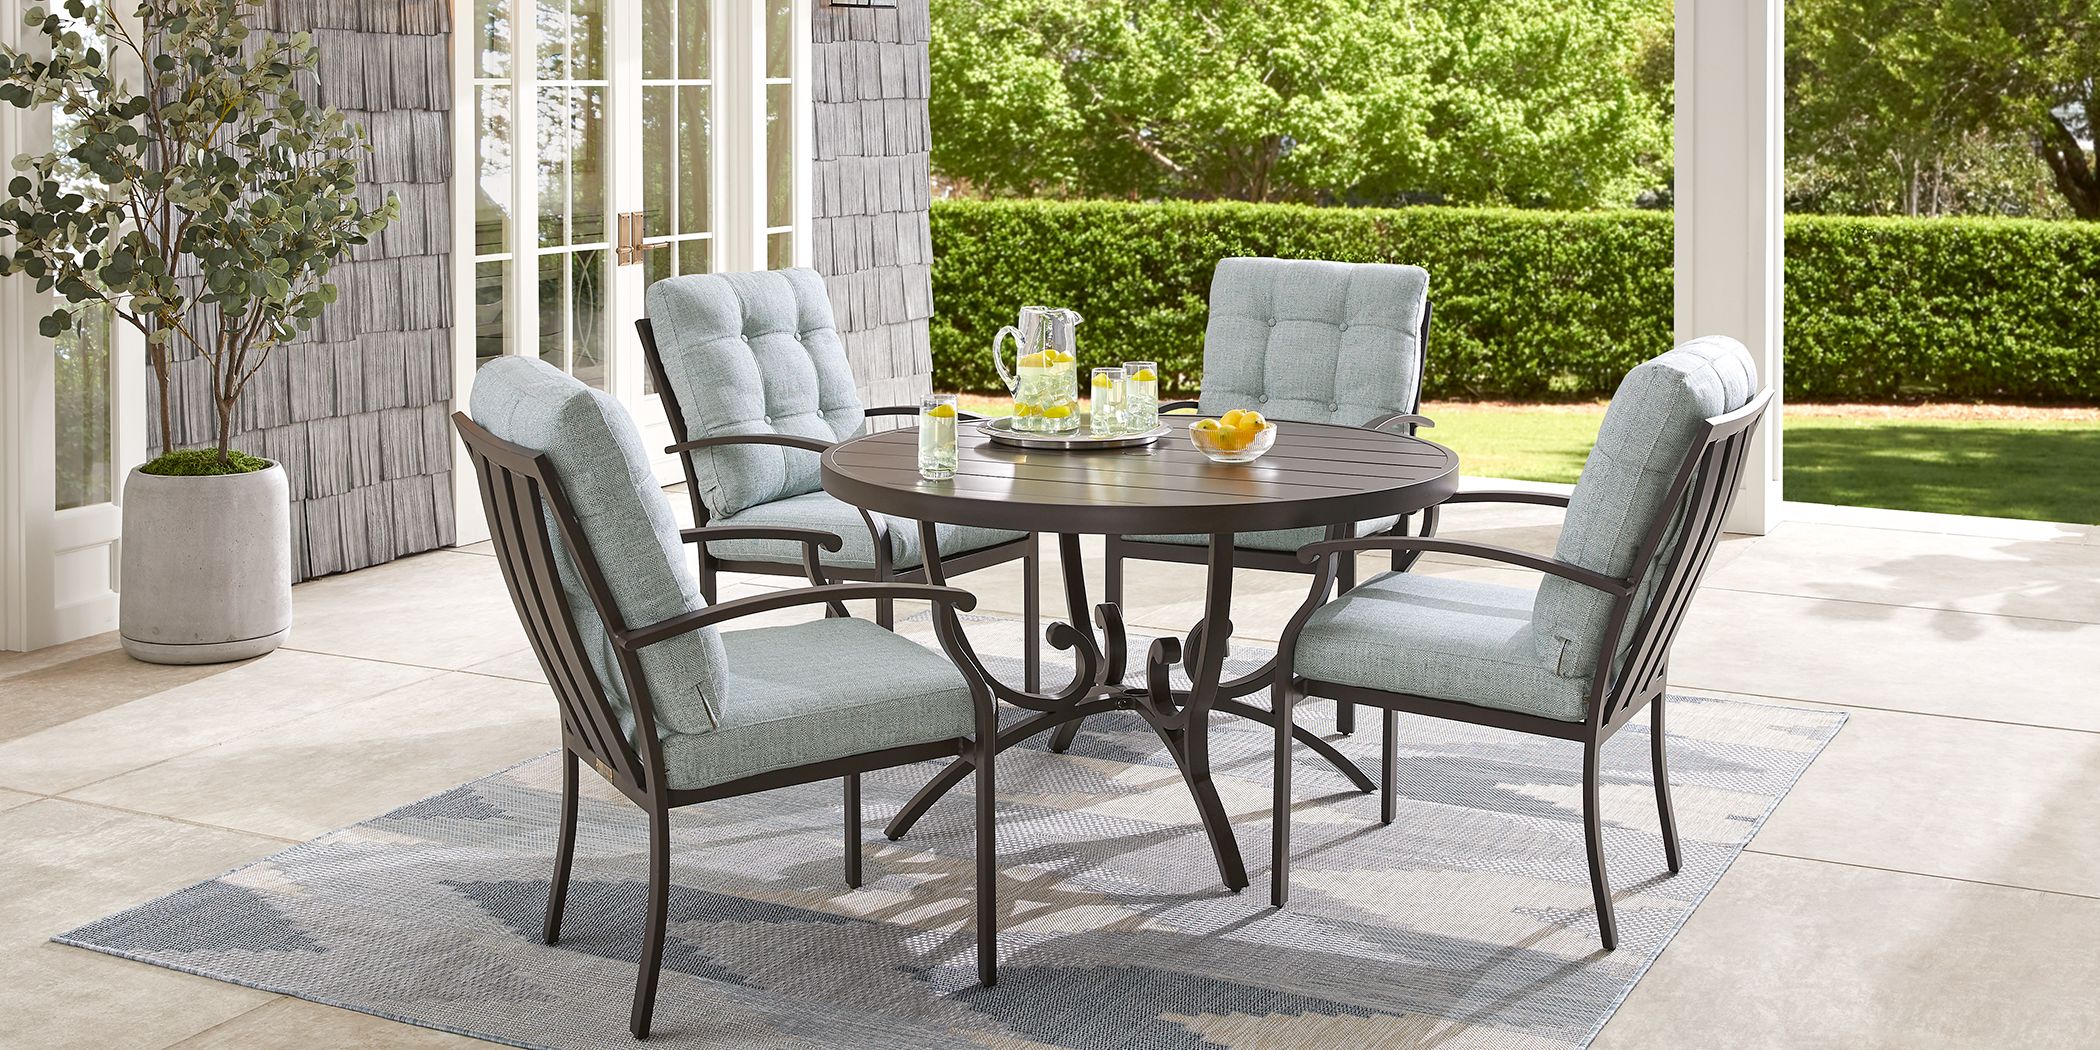 Round Outdoor Patio Dining Sets, Outdoor Round Patio Tables And Chairs